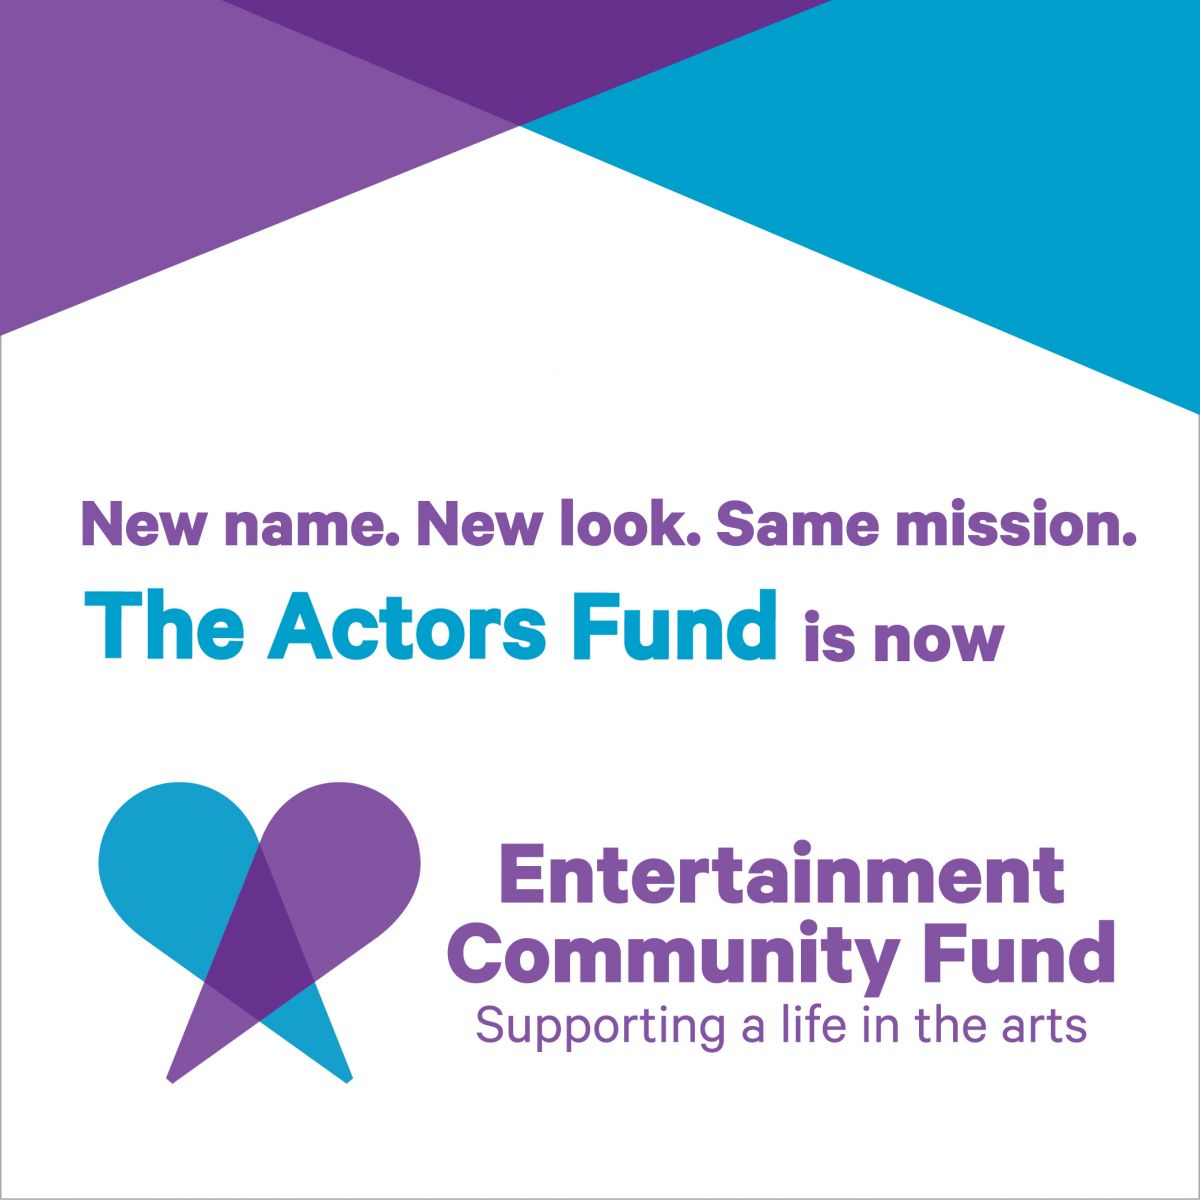 #TheActorsFund is now the Entertainment Community Fund! For over 140 years, the Fund has supported @alifeinthearts for those who work in performing arts & entertainment. While the name has changed, their mission, vision & values are the same. Learn more: entertainmentcommunity.org